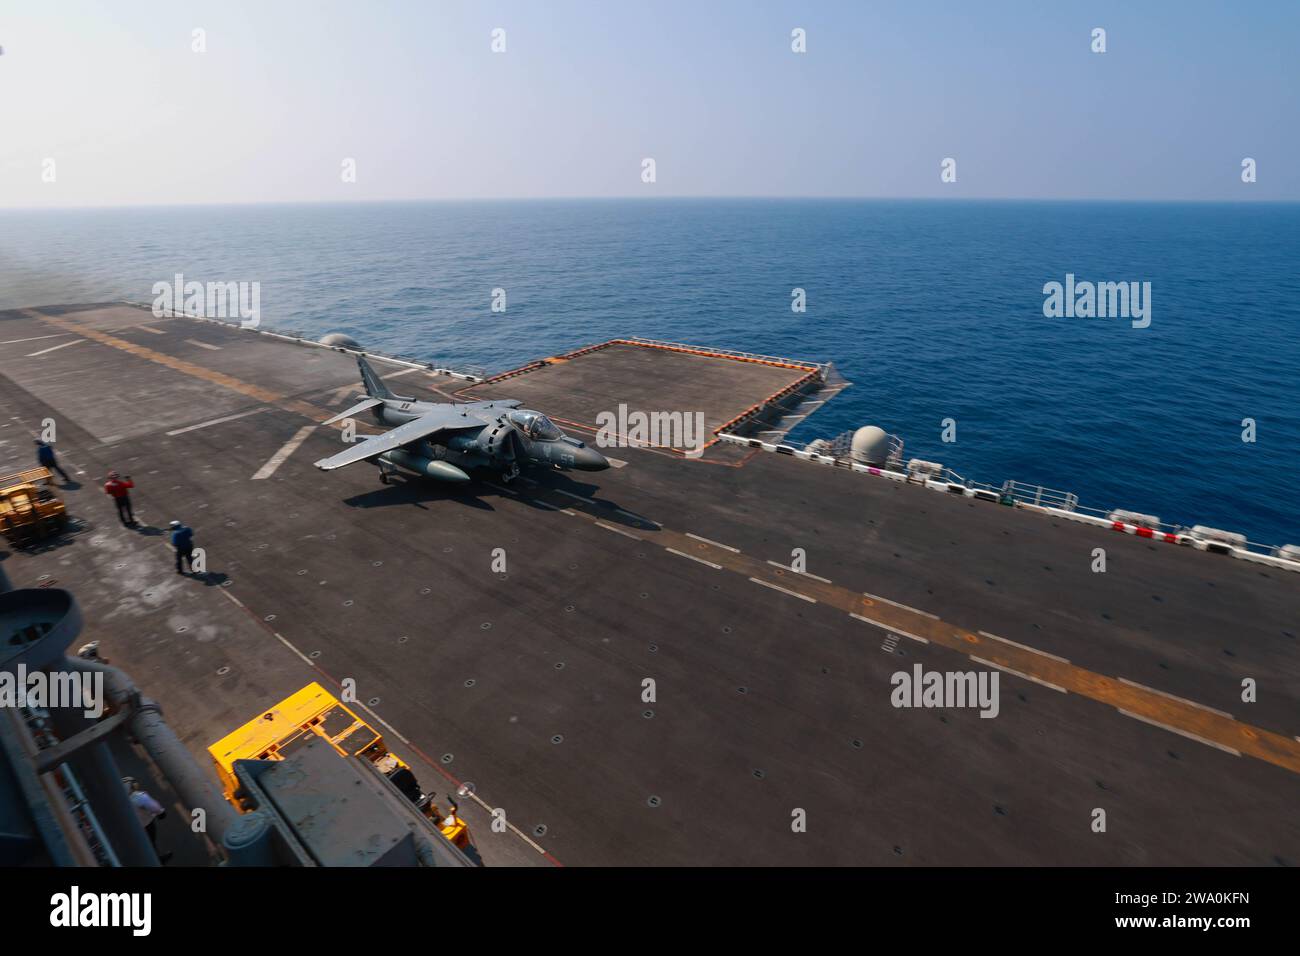 231023-N-OQ442-2020 GULF OF ADEN (Oct. 23, 2023) An AV-8B Harrier, attached to Marine Medium Tilt Rotor Squadron 126 (reinforced) launches off the Wasp-class amphibious assault ship USS Bataan (LHD 5) flight deck in the Gulf of Aden, Oct. 23. Components of the Bataan Amphibious Ready Group and 26th Marine Expeditionary Unit (Special Operations Capable) are deployed to the U.S. 5th Fleet area of operations to help ensure maritime security and stability in the Middle East region. (U.S. Navy photo by Mass Communication Specialist 3rd Class Riley Gasdia) Stock Photo